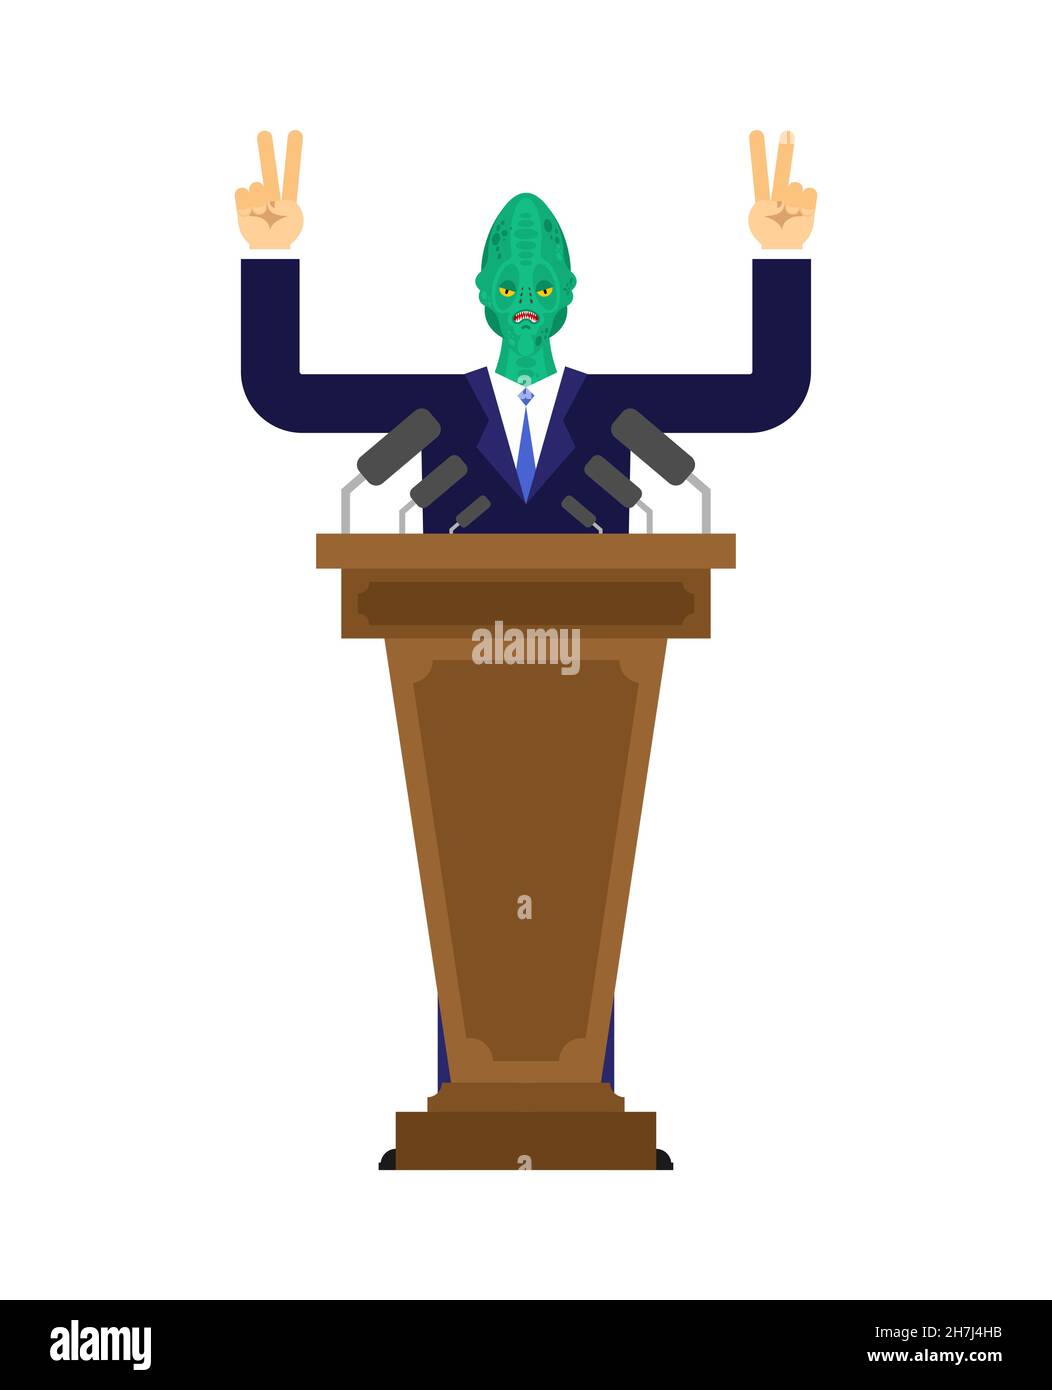 Reptilian speaks from podium. Alien land invaders. Reptilian conspiracy theory. reptiloid humanoid beings from another planet with green skin. theory Stock Vector